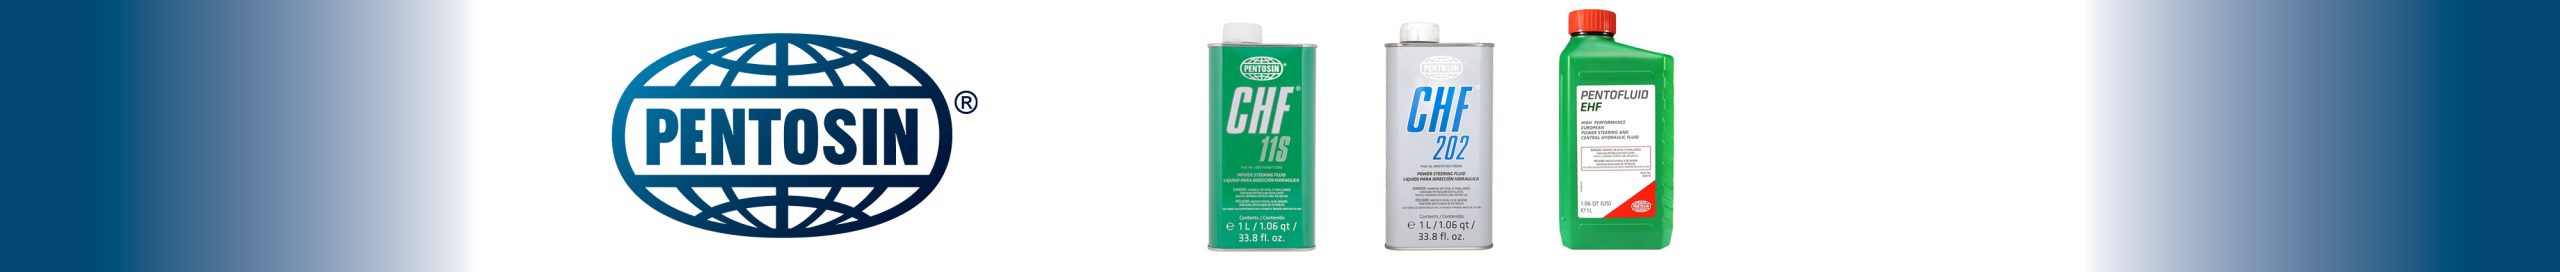 CRP Automotive Introduces New Packaging For Pentosin Brand